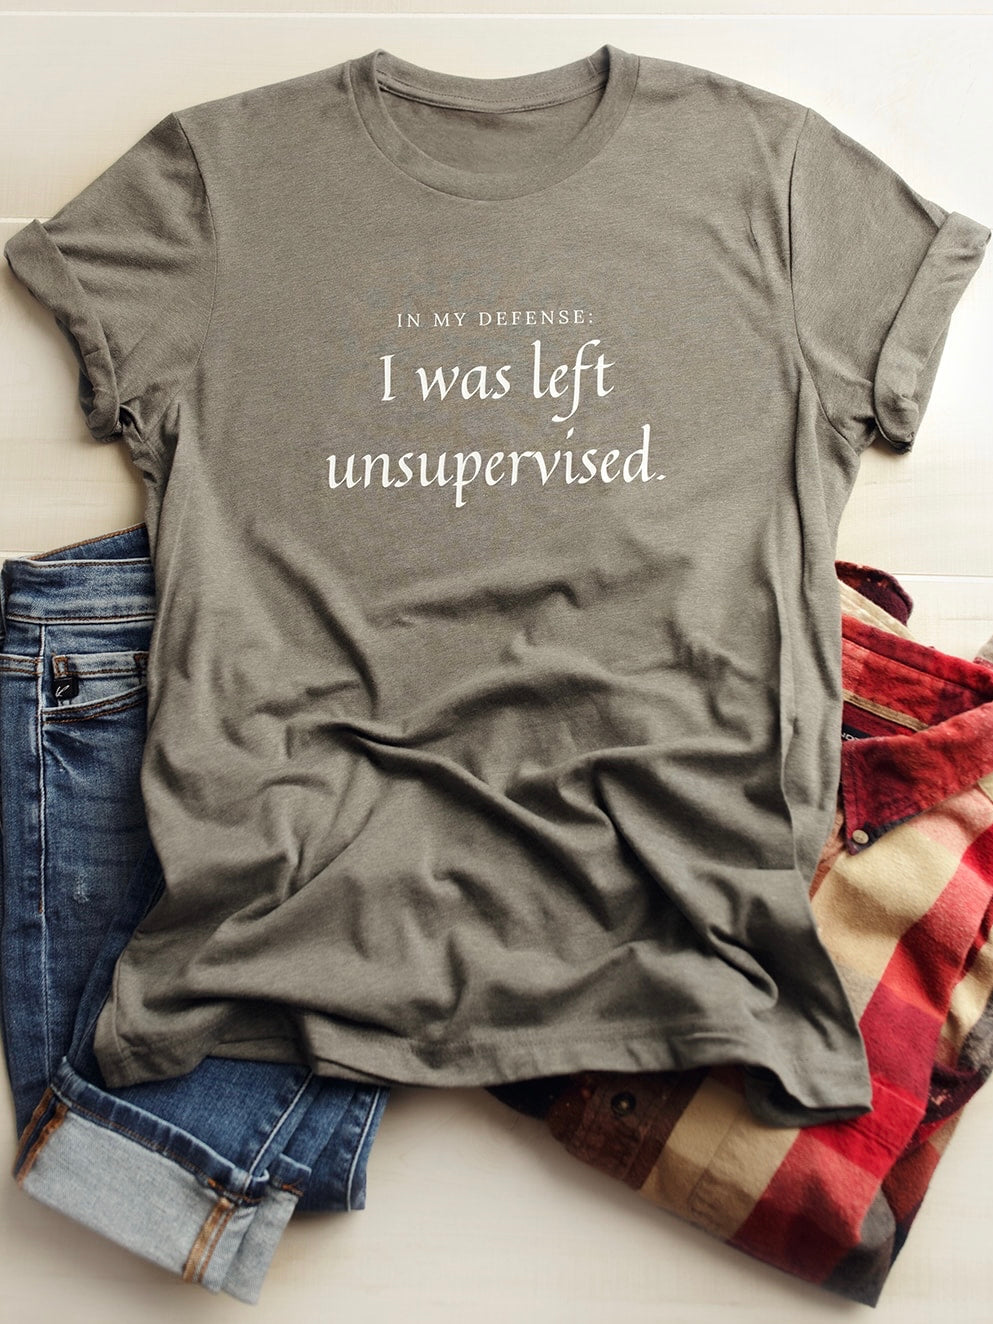 Gray Bella Canvas Tee that says In My Defense: I was left unsupervised.